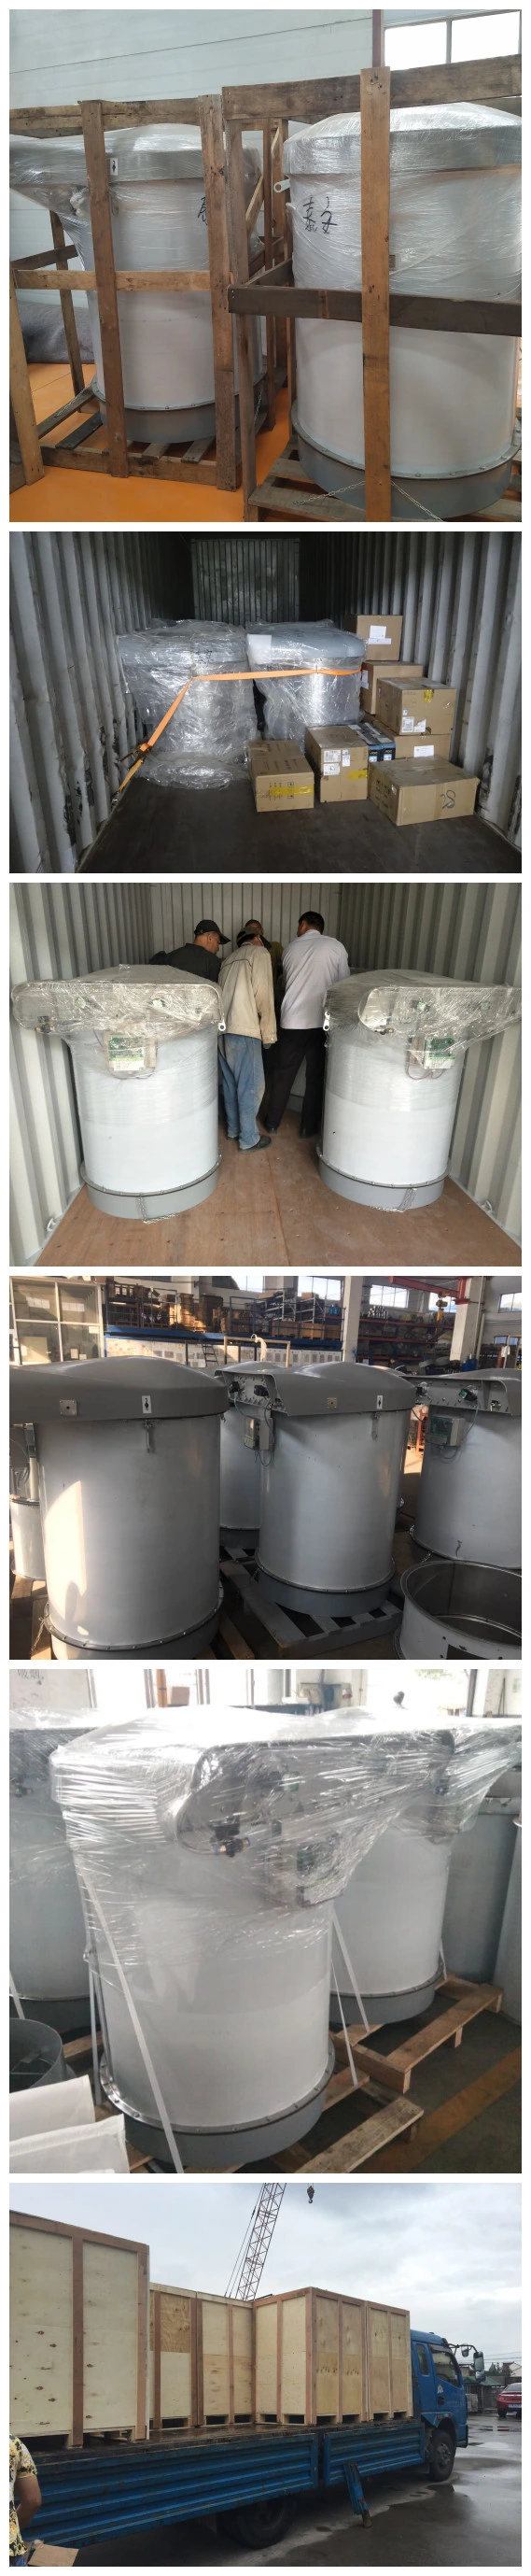 Silo Top Pulse Jet Dust Collectors Dust Collector Hopper Dust Collector for Cement Silo